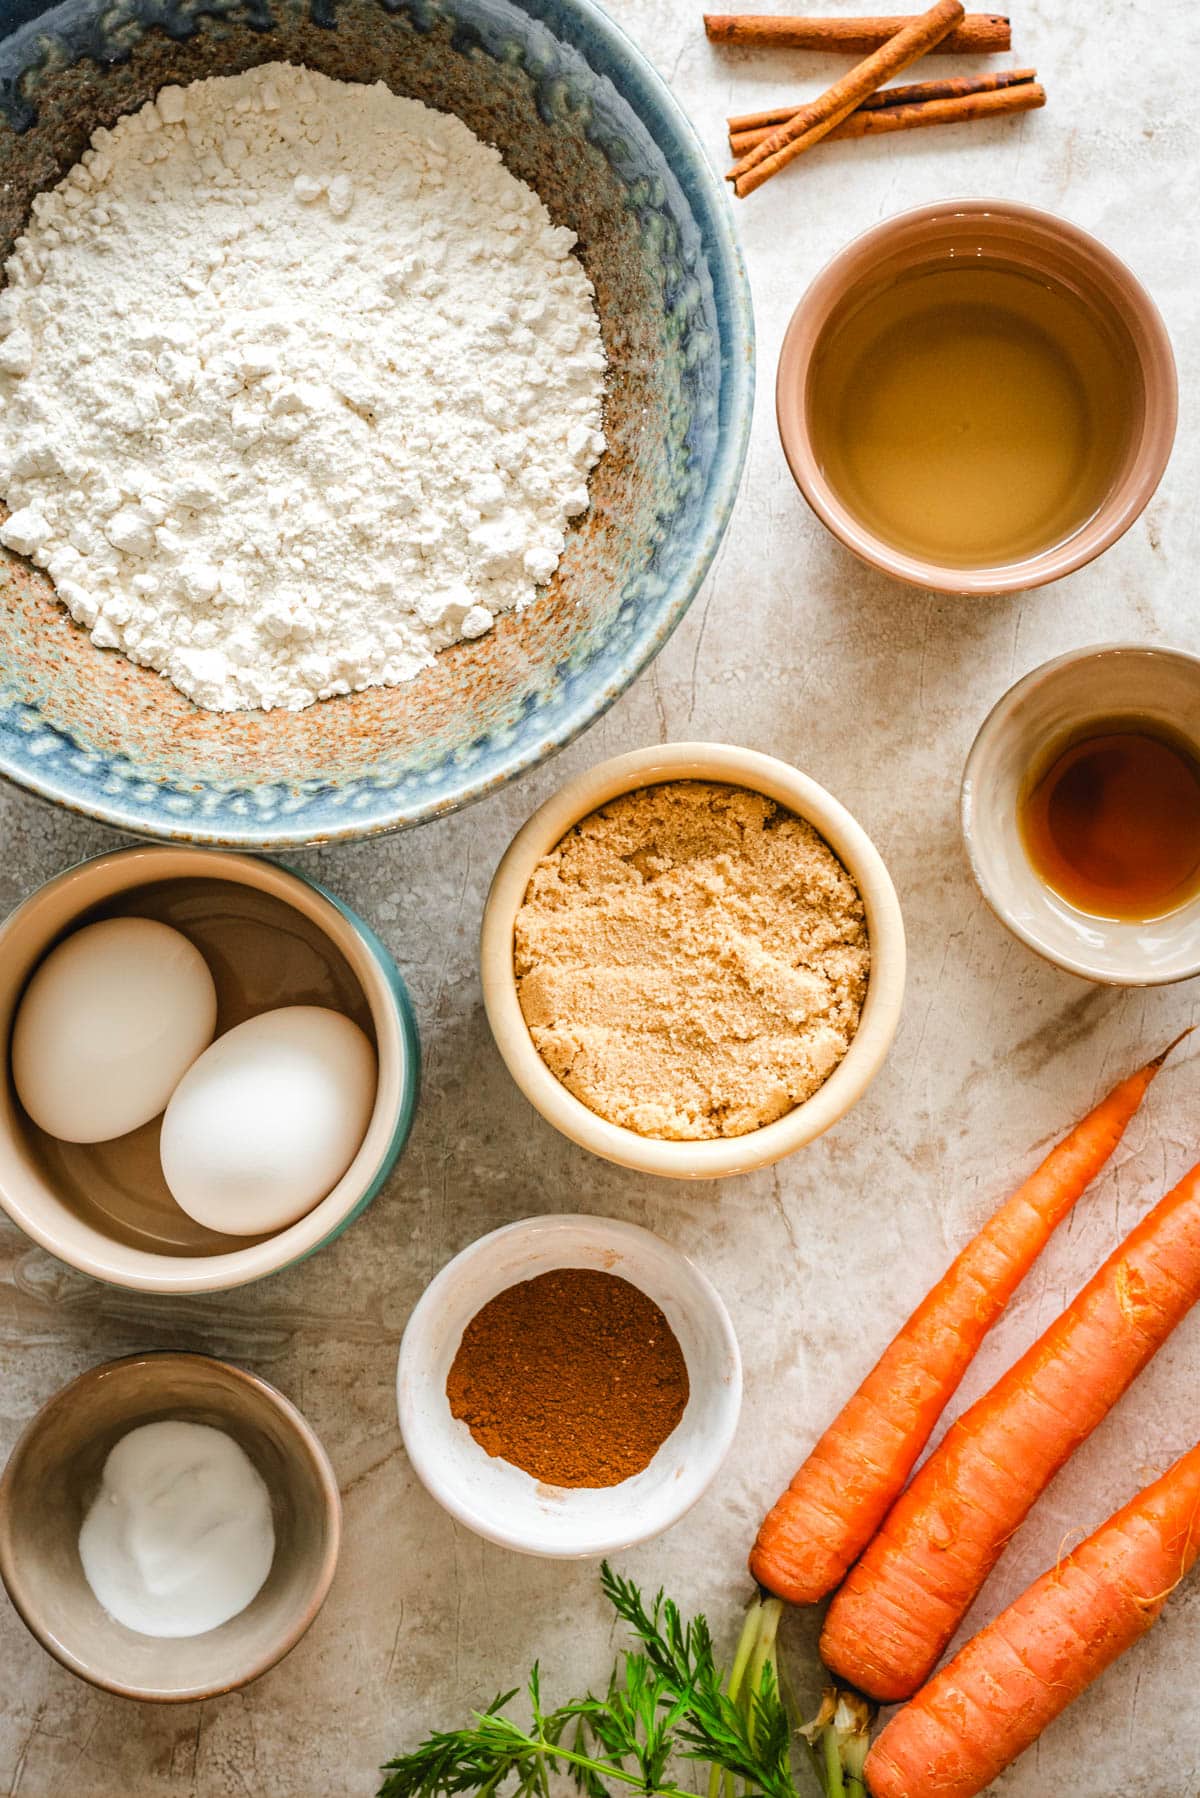 Ingredients for carrot cake cupcakes - flour, eggs, leaveners, warm spices, brown sugar, oil, vanilla extract, and carrots.